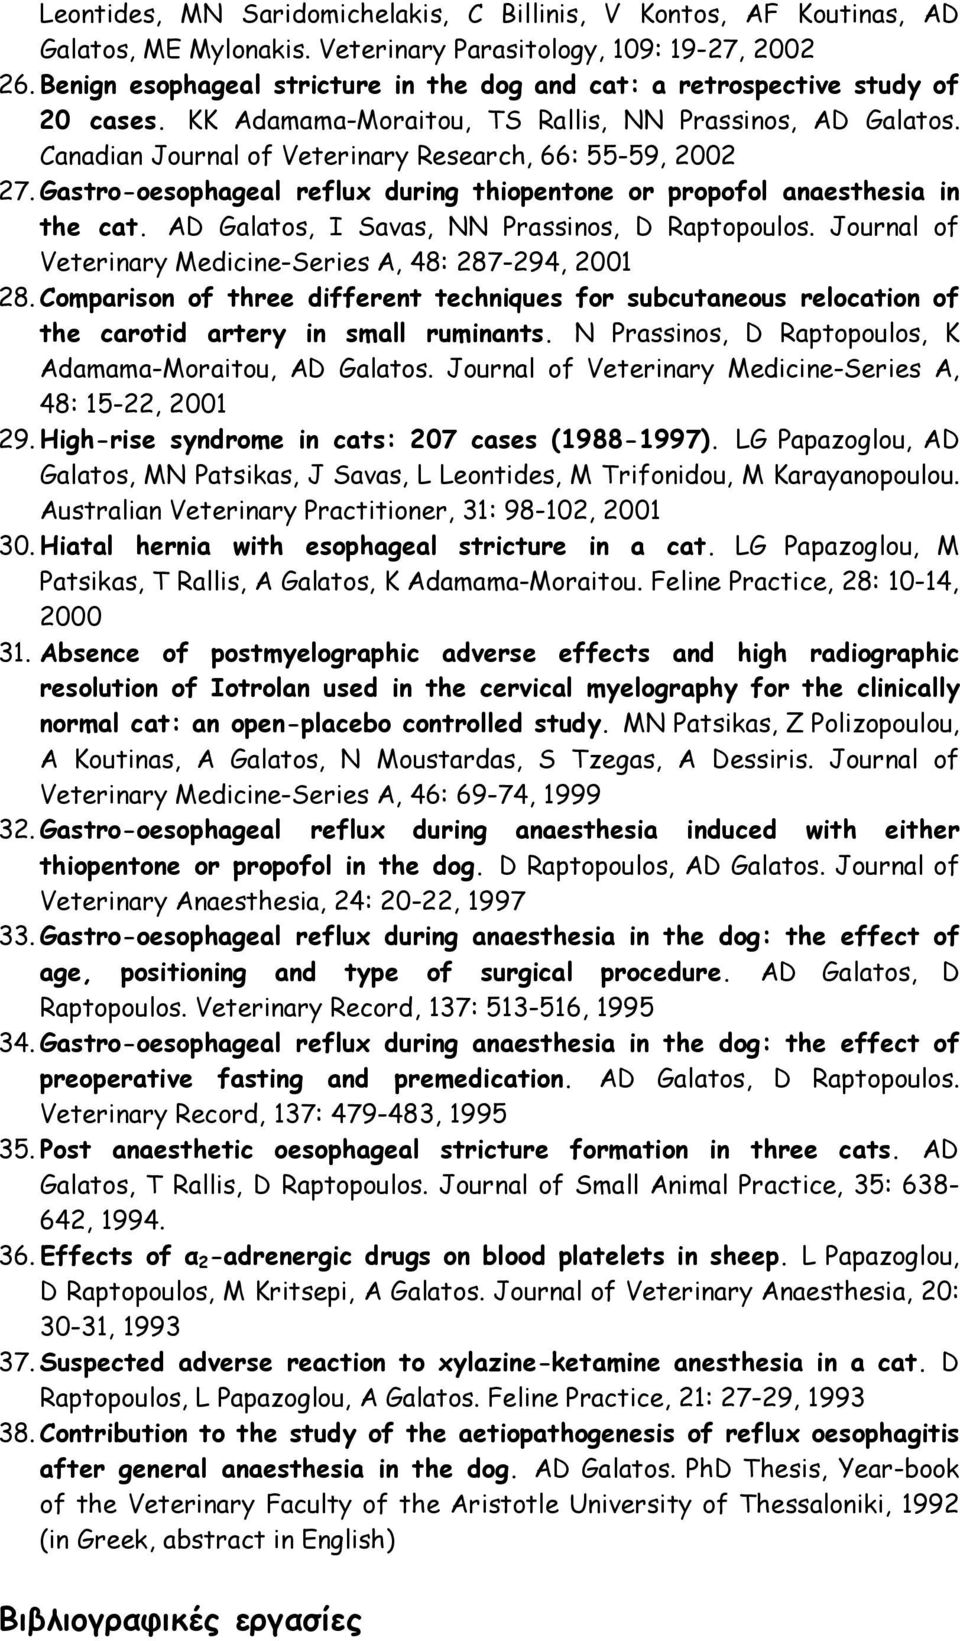 Canadian Journal of Veterinary Research, 66: 55-59, 2002 27. Gastro-oesophageal reflux during thiopentone or propofol anaesthesia in the cat. AD Galatos, I Savas, NN Prassinos, D Raptopoulos.